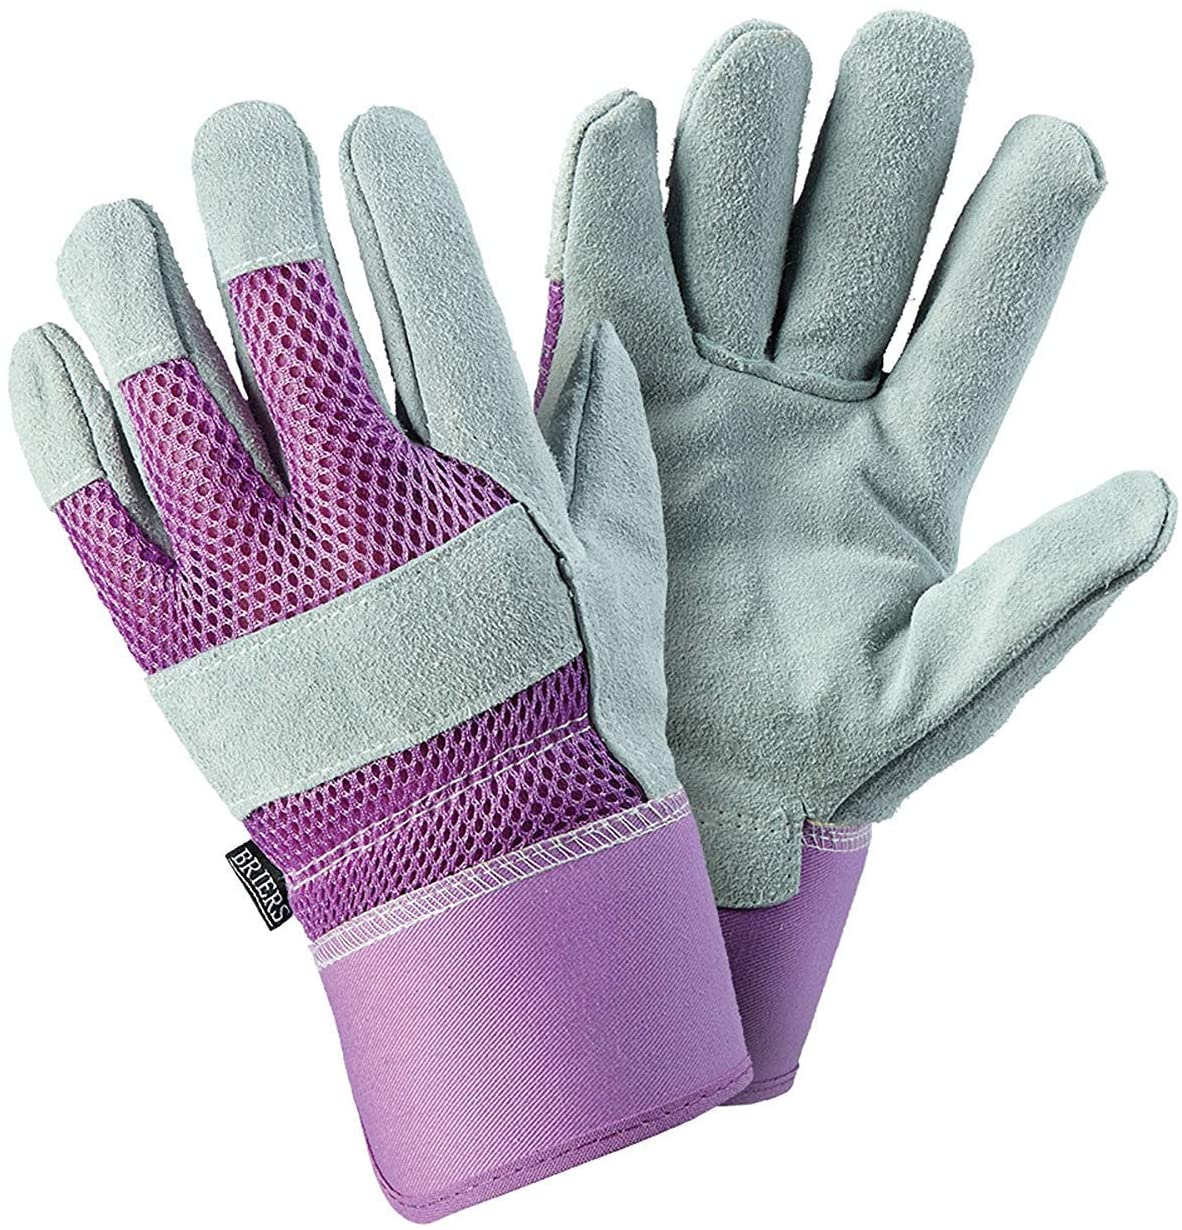 Briers Breathable Tuff Rigger - Pink S7